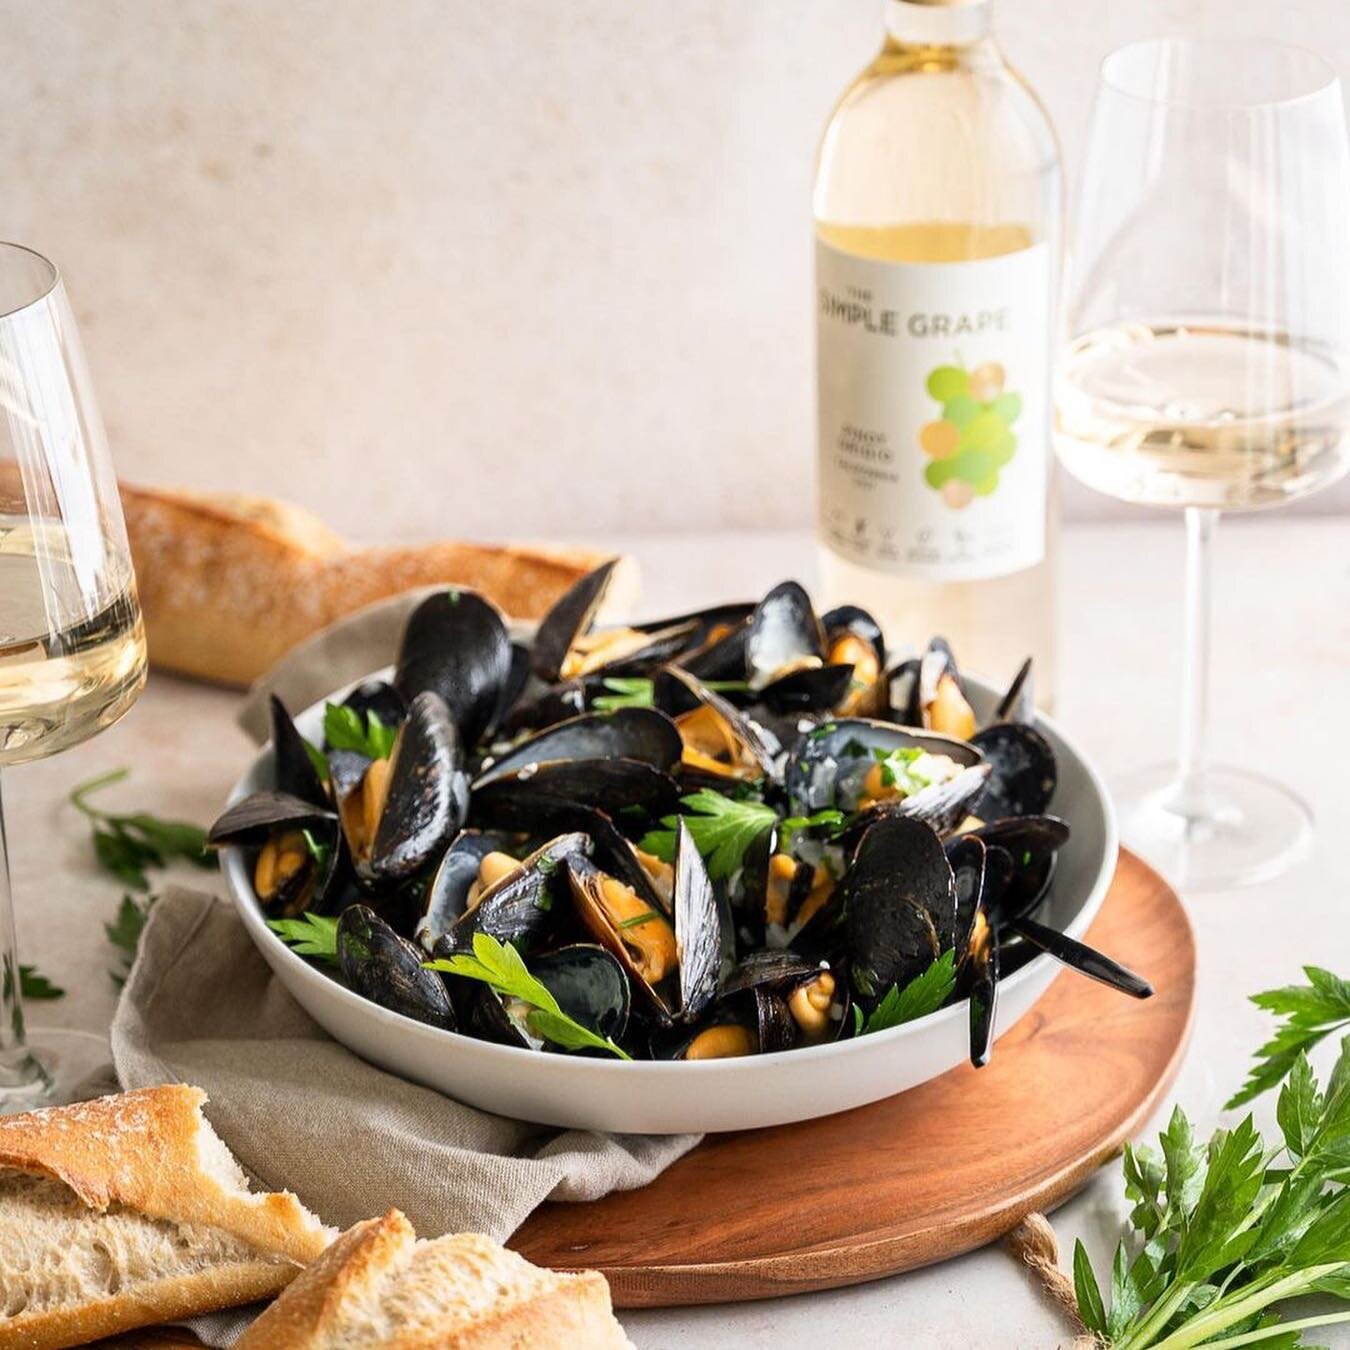 With the weather heating up, we&rsquo;re cracking open a chilled bottle of our Pinot Grigio and recreating @tasting.with.tina&rsquo;s Garlic Butter Mussels!⁠
⁠
Garlic Butter Mussels recipe:⁠
2 lb Mussels ⁠
4 tablespoons unsalted butter⁠
1 white onion